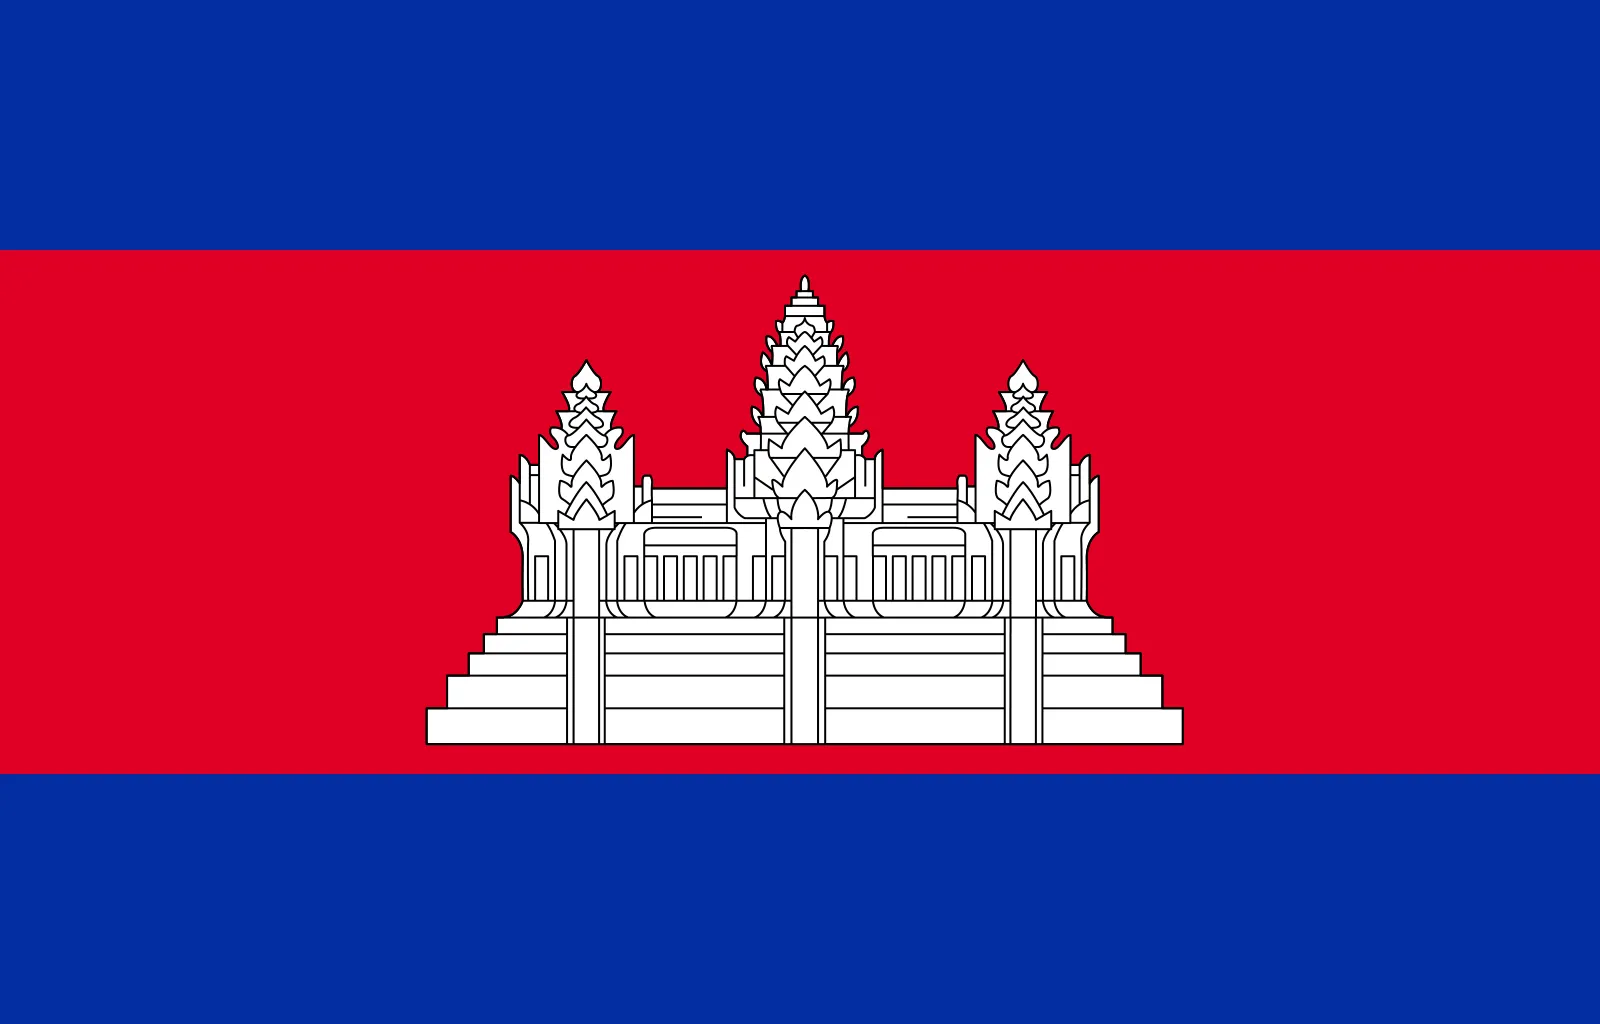 Political Parties in Cambodia